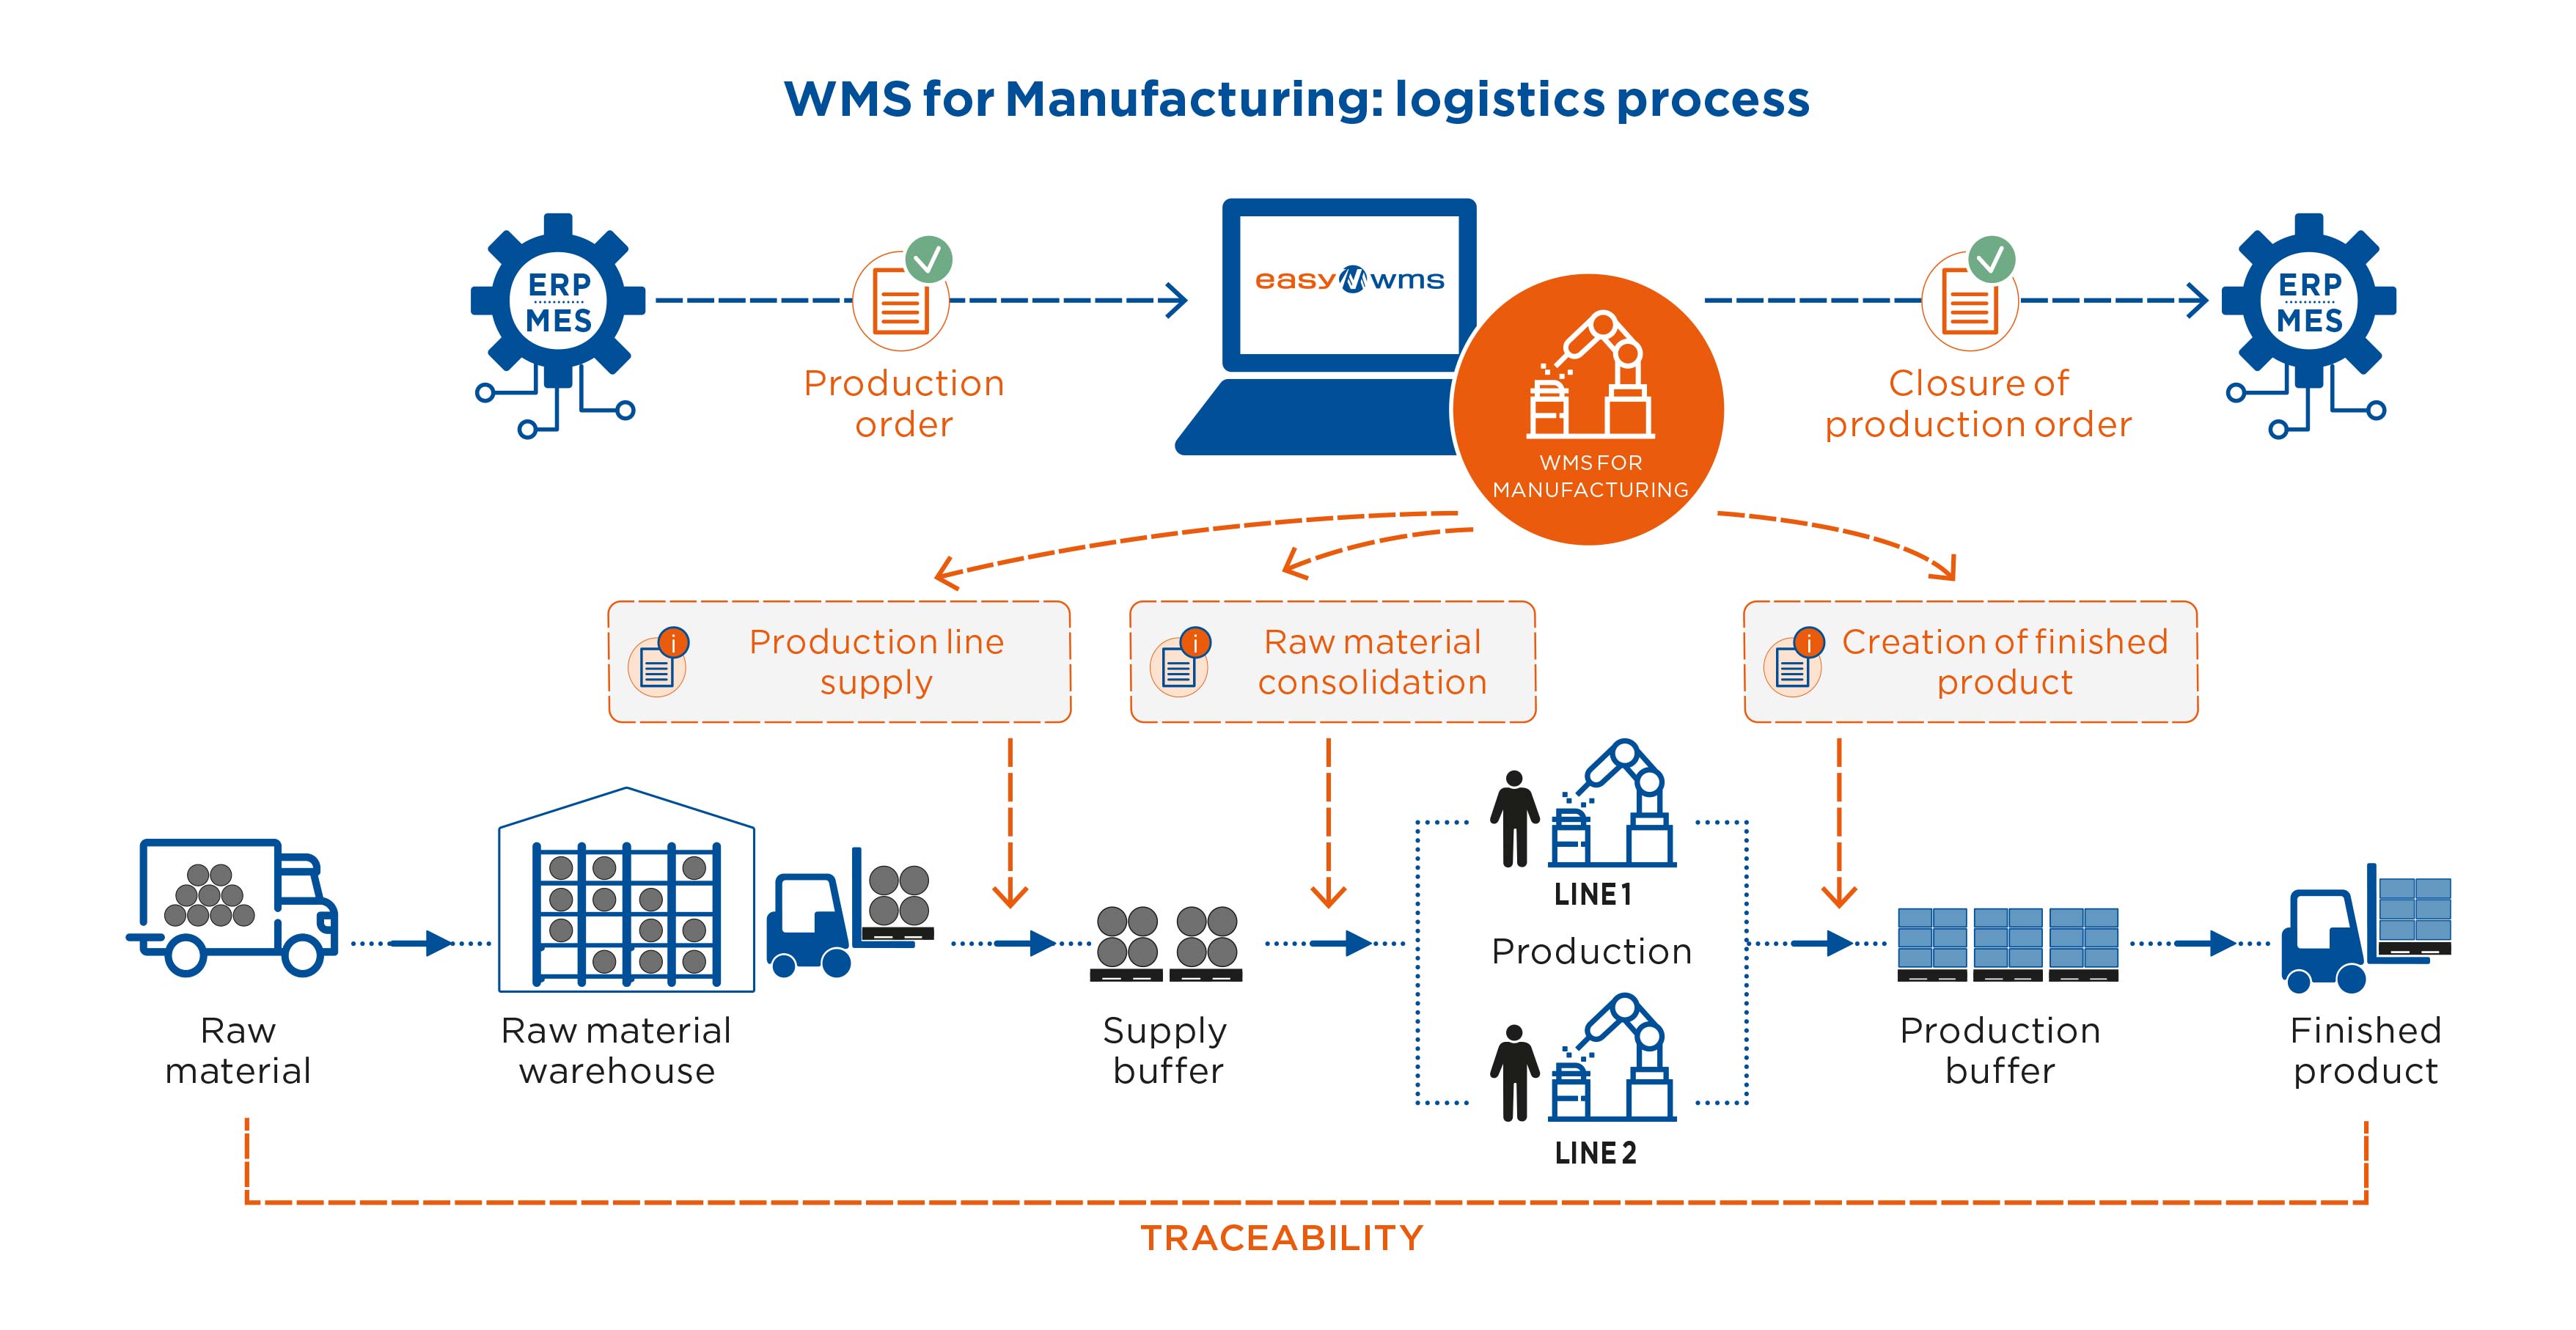 WMS for Manufacturing: logistics process